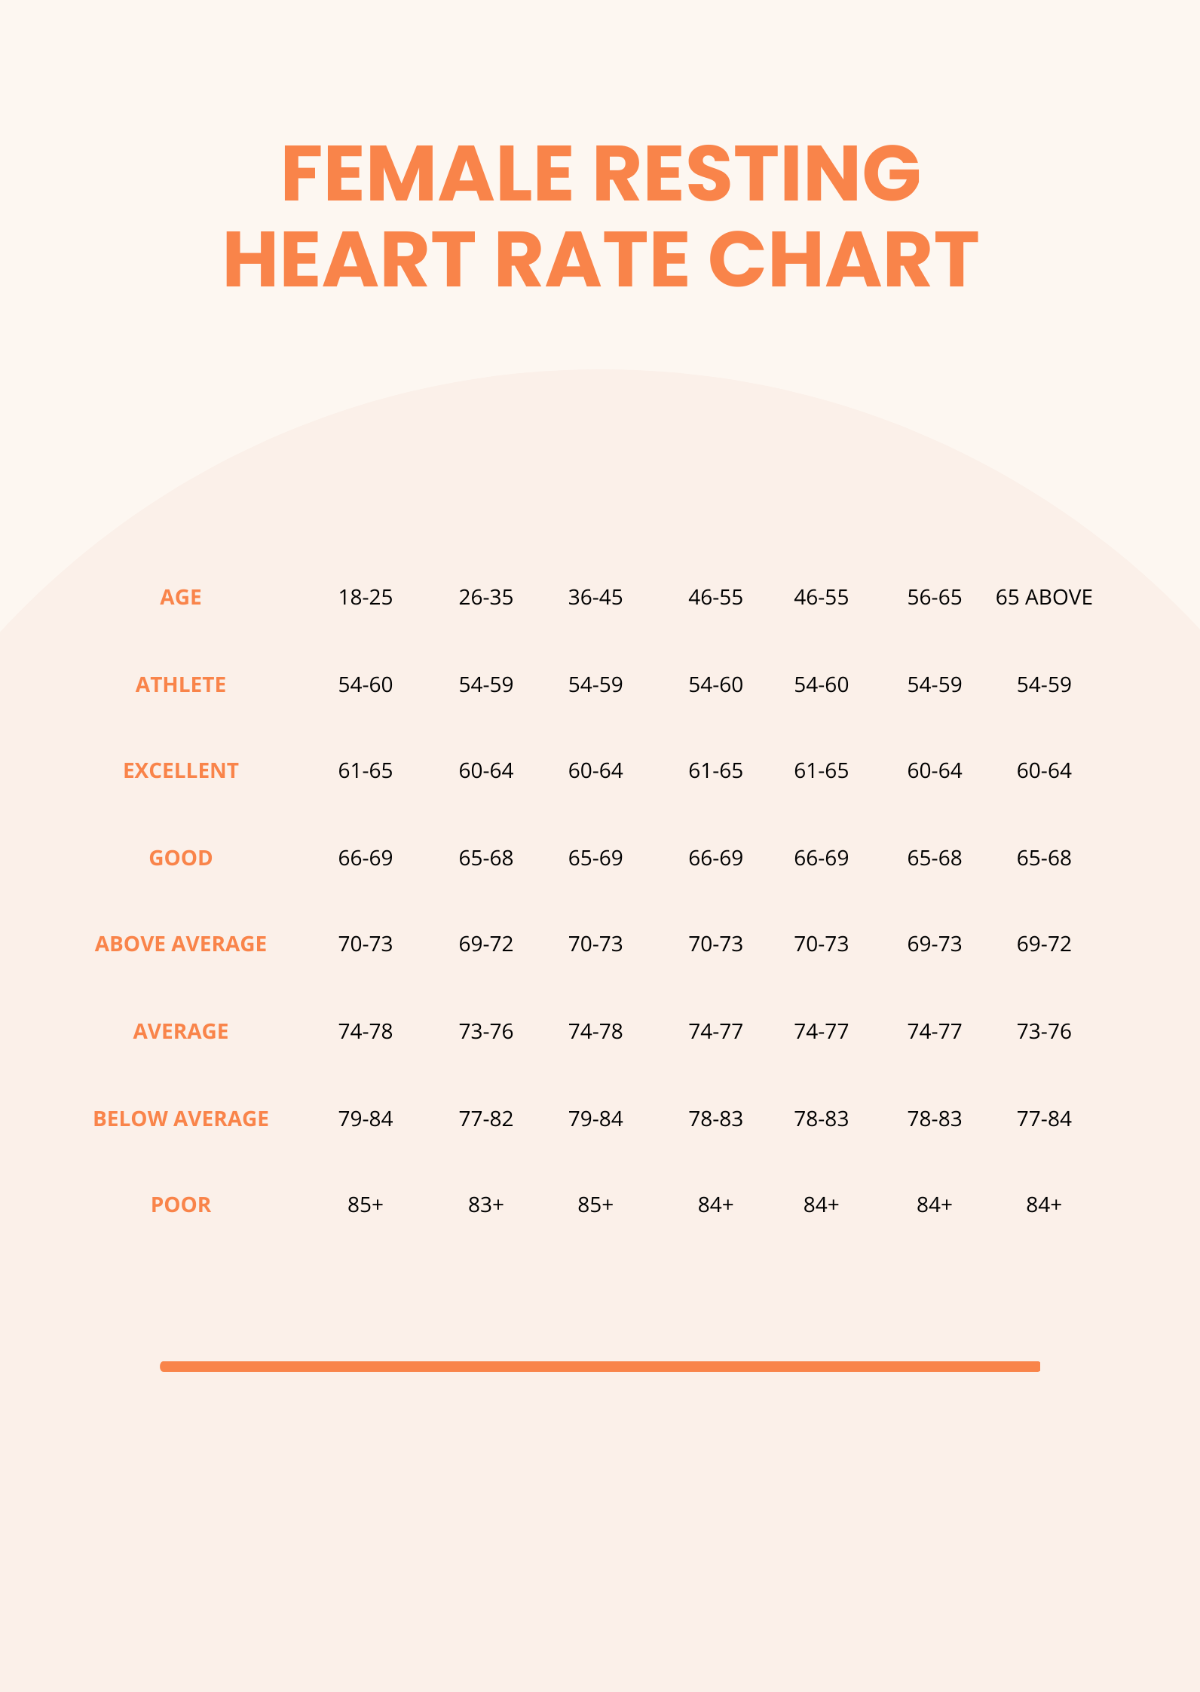 Female Resting Heart Rate Chart Template